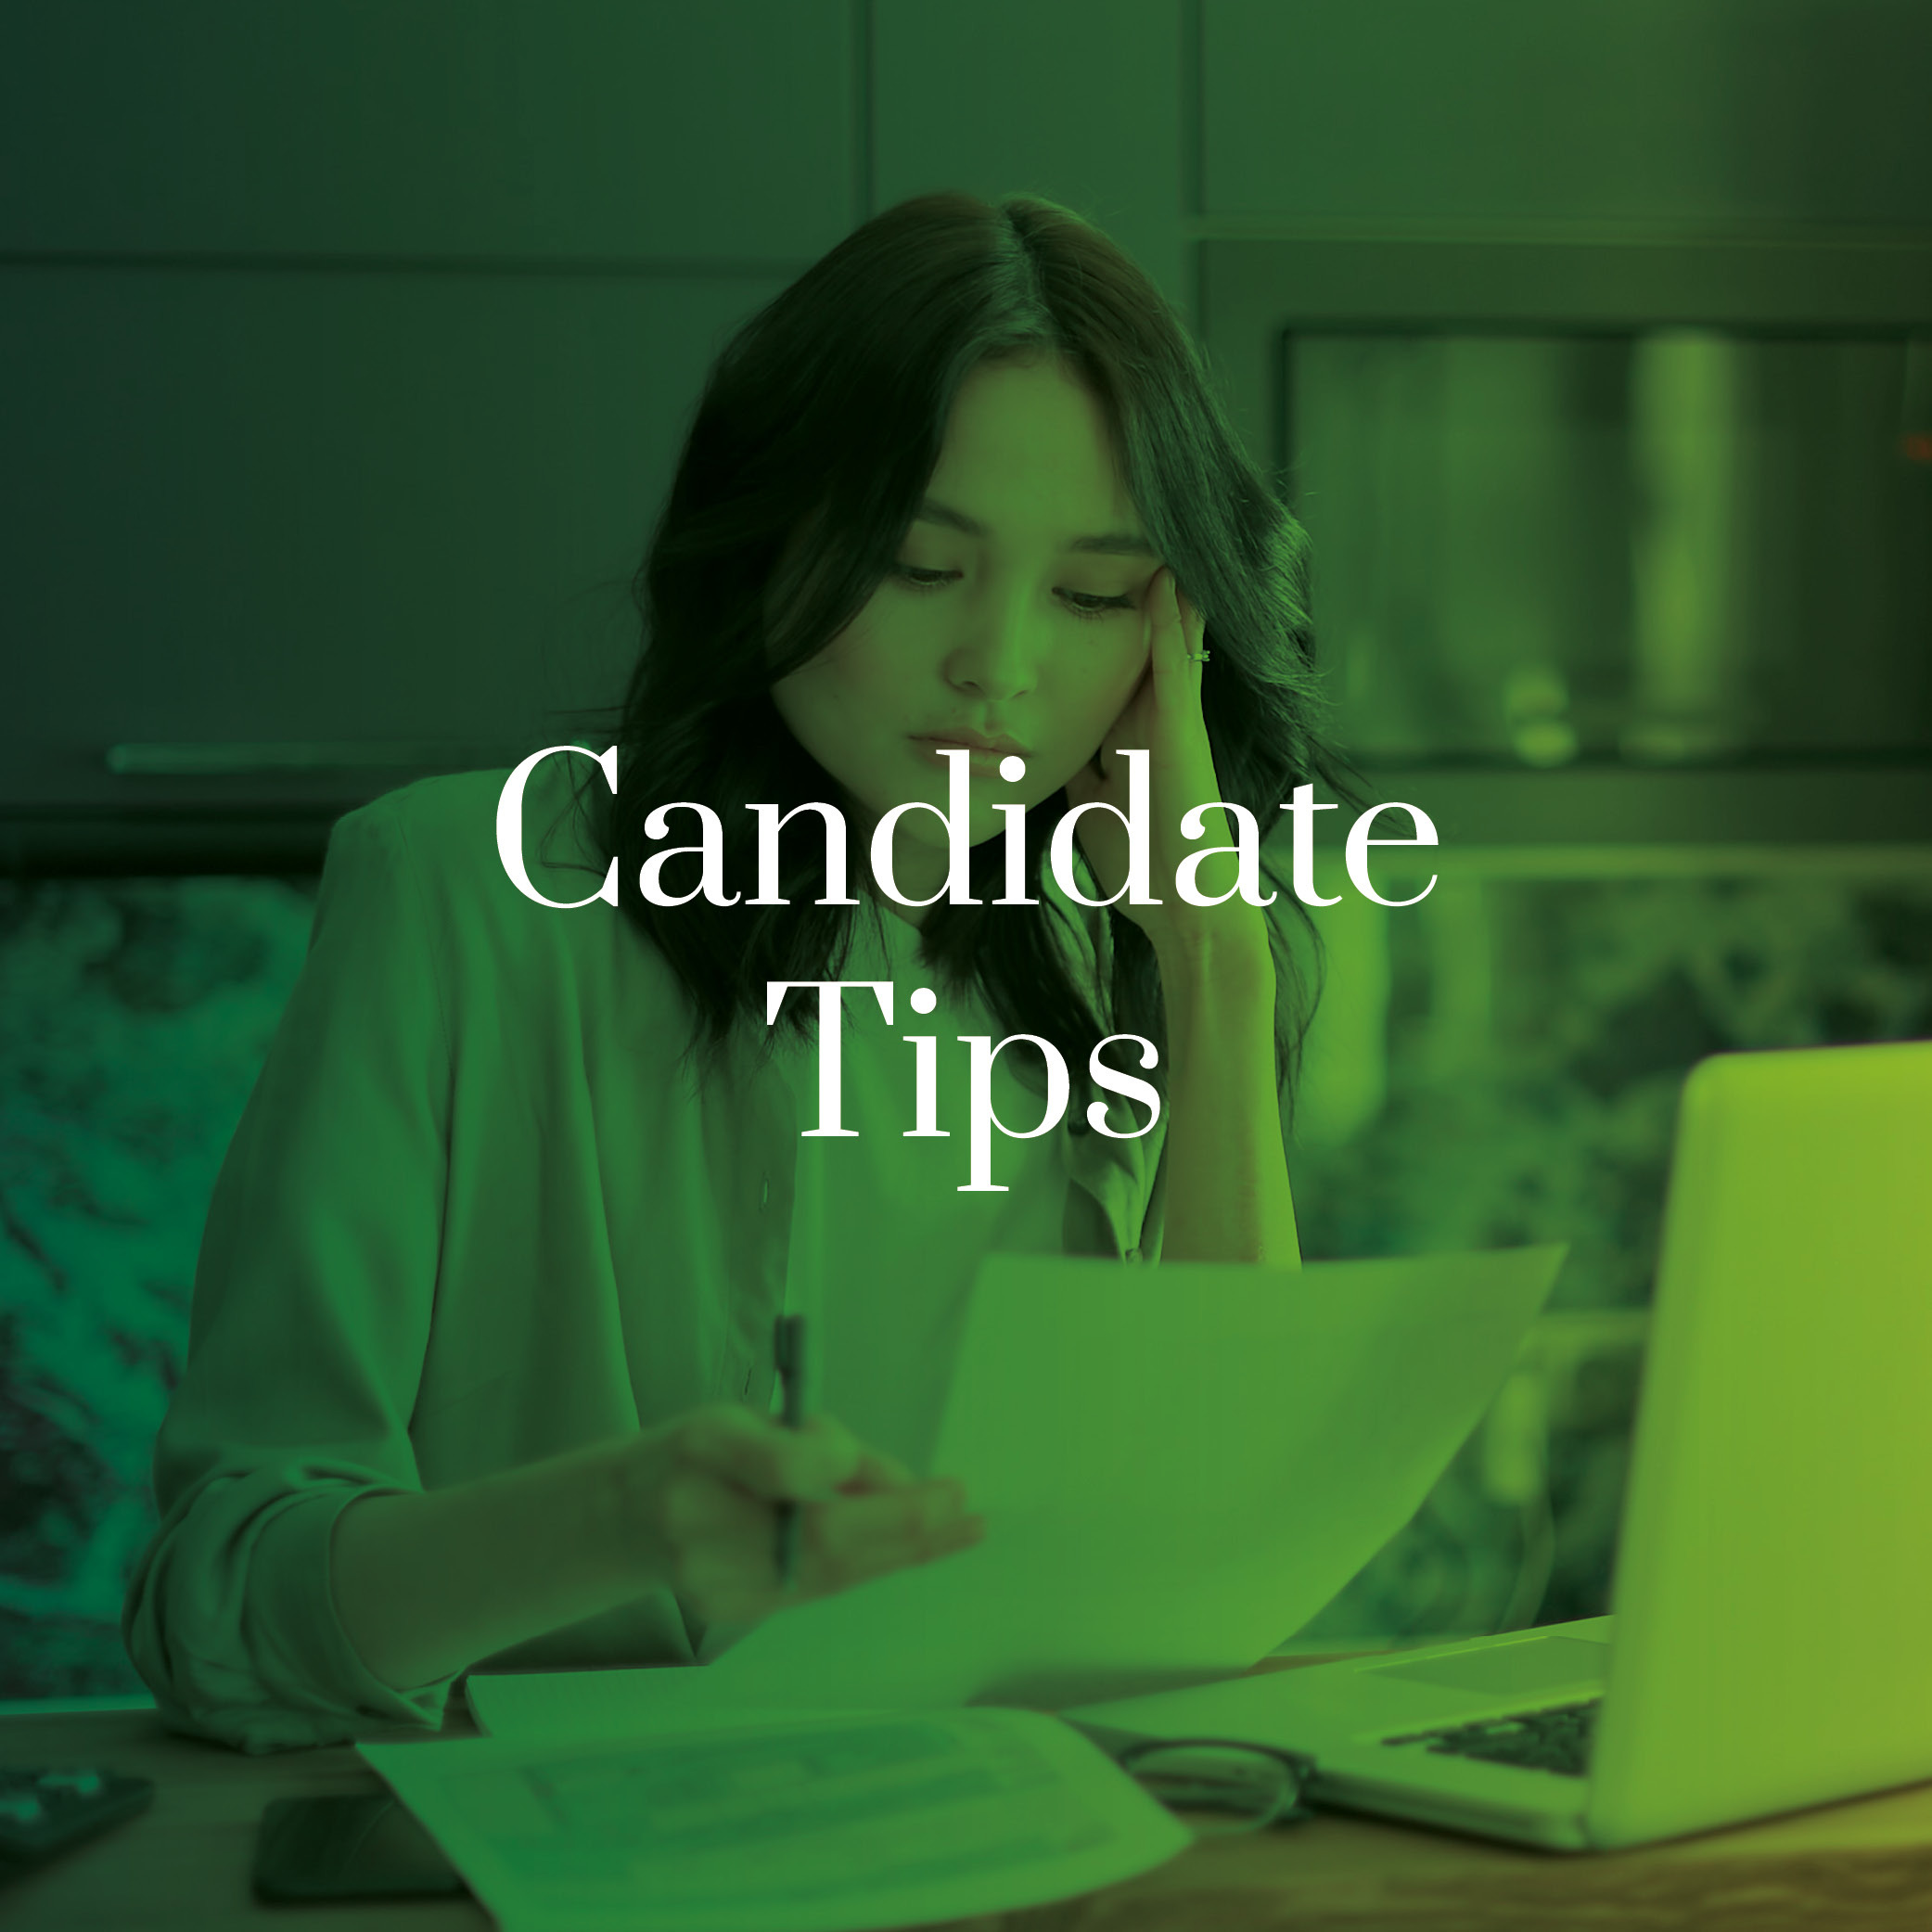 Candidates Tips